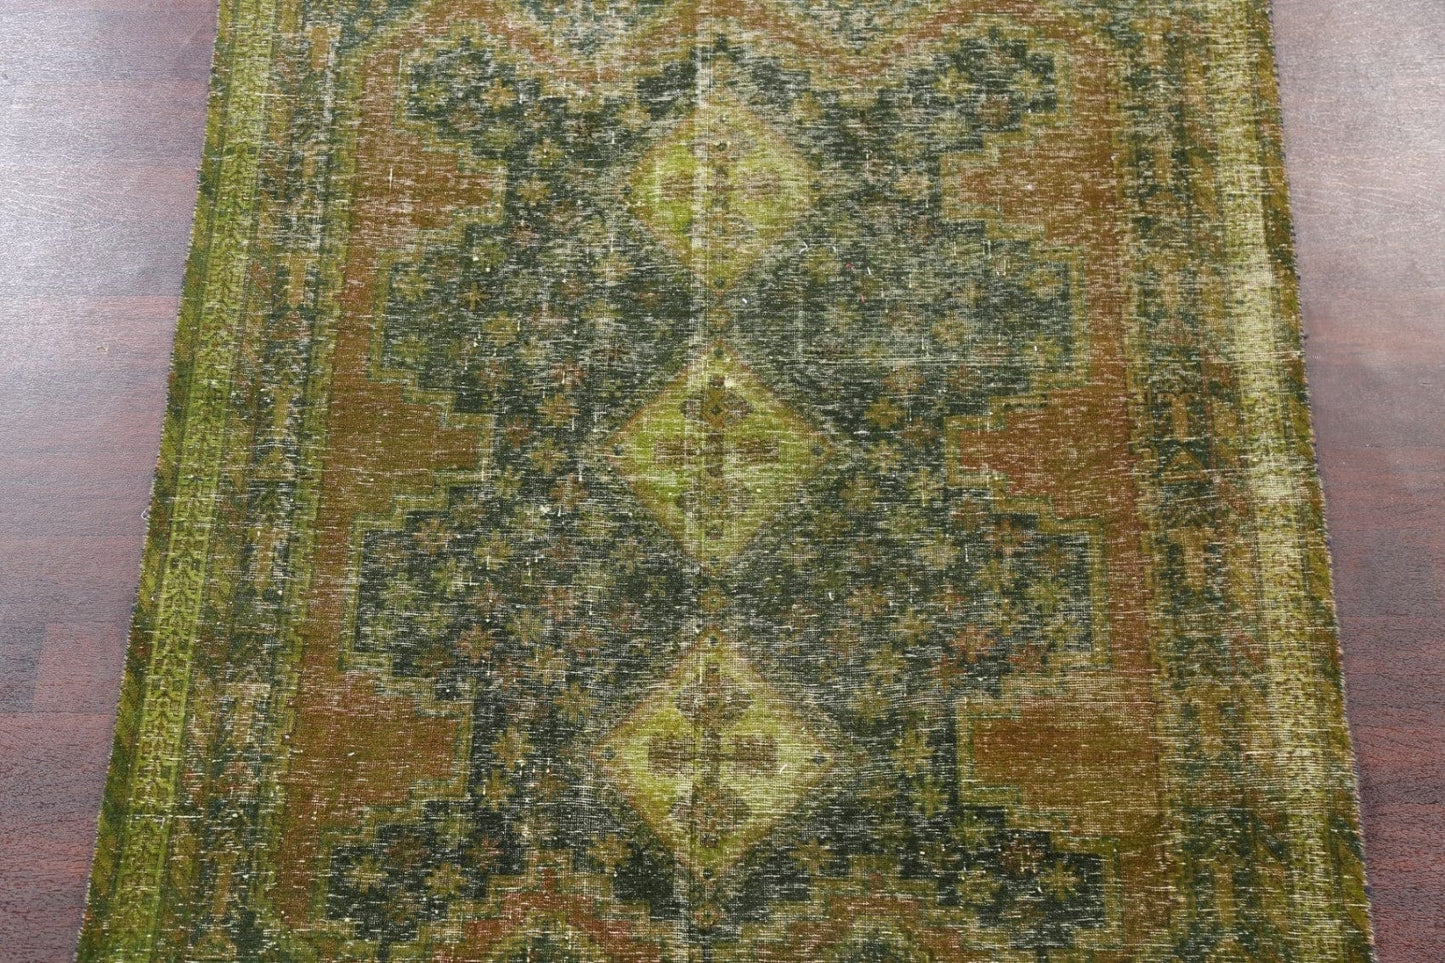 Distressed Over-Dyed Sirjan Persian Area Rug 5x7